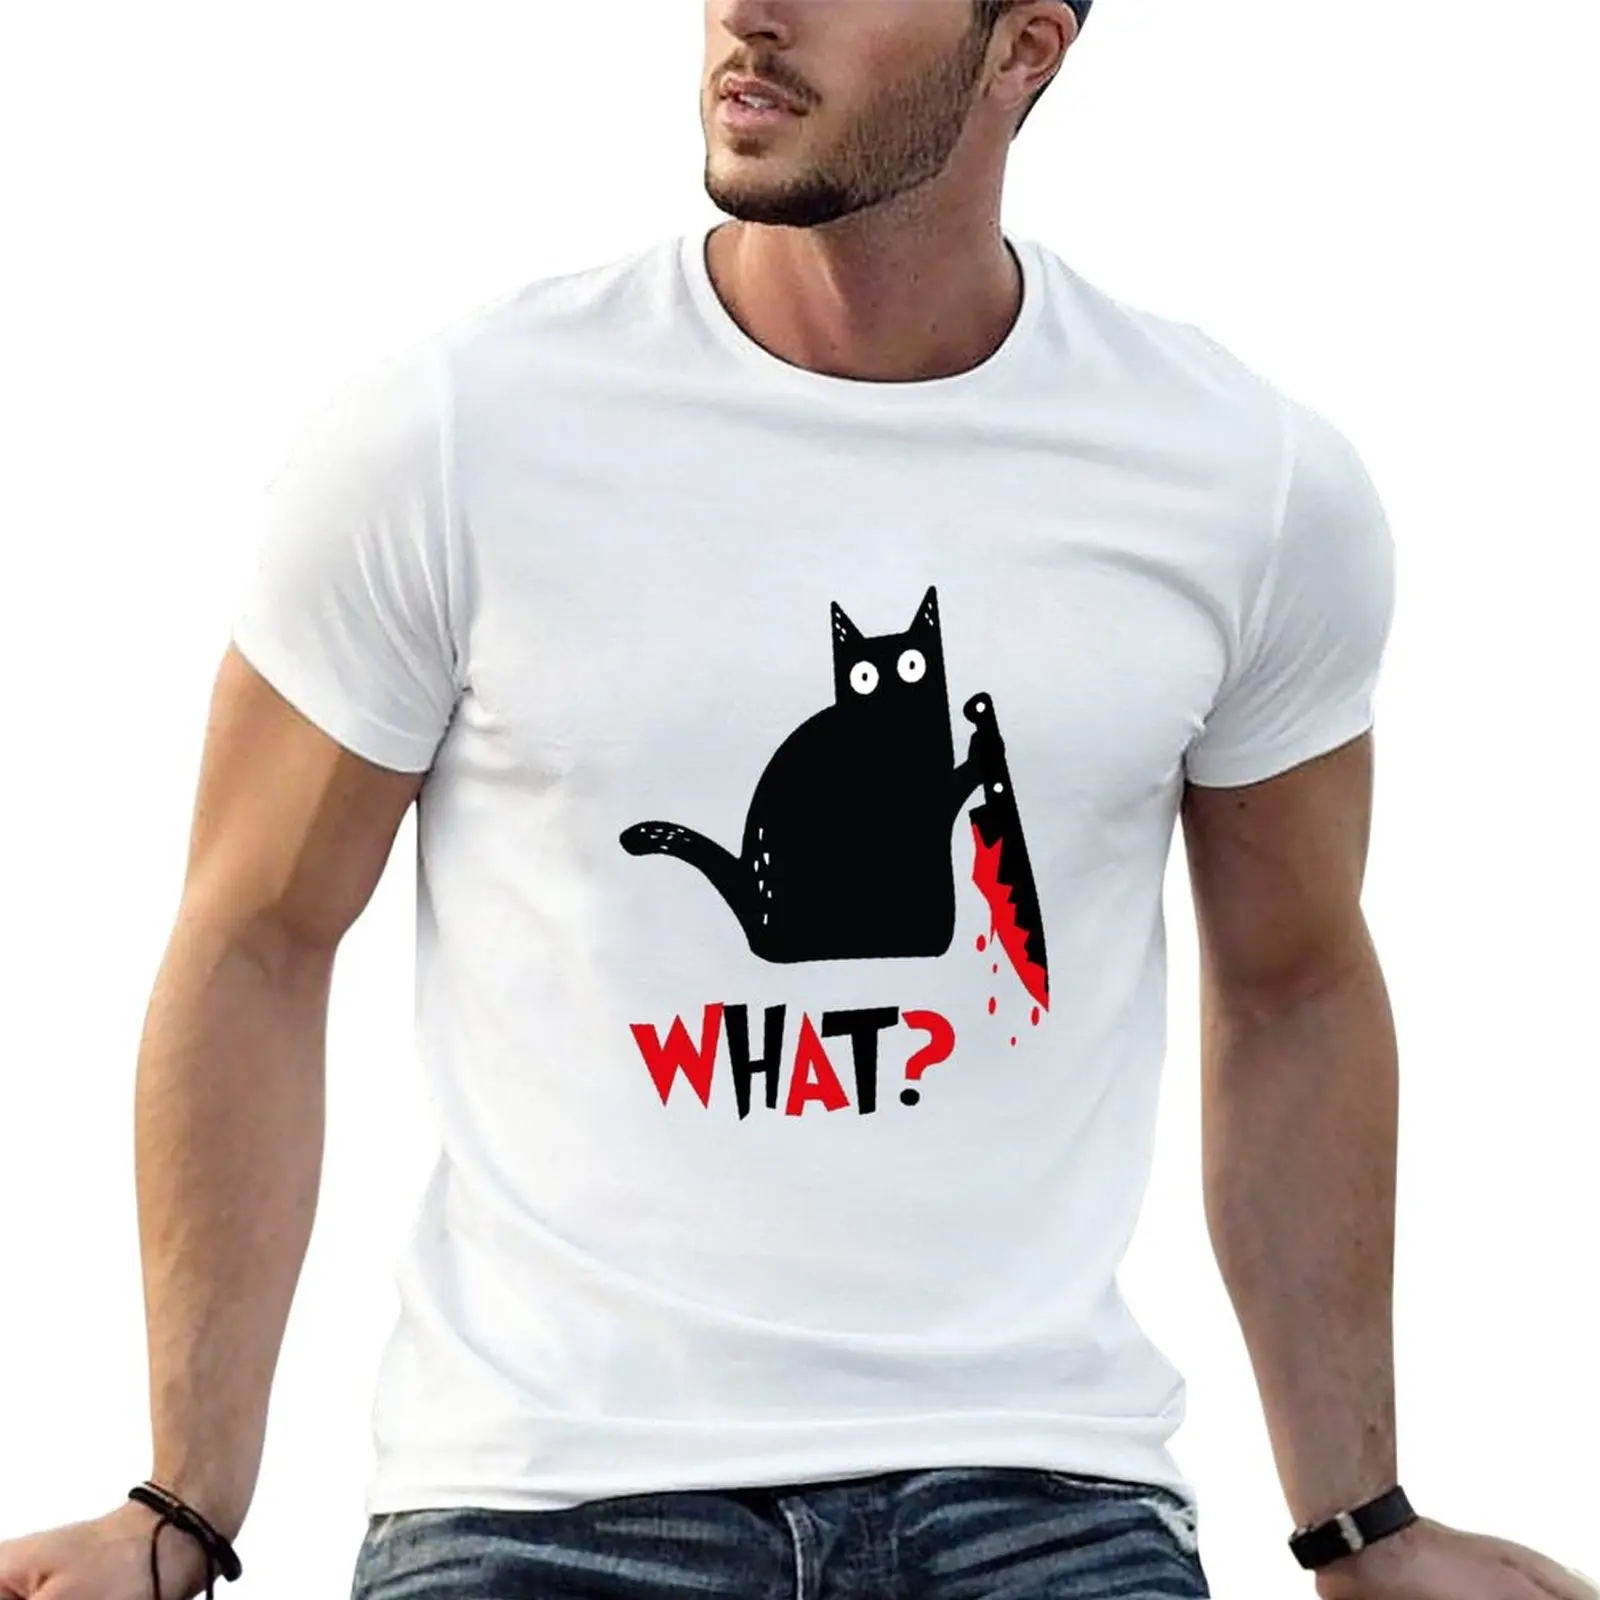 

New Funny Cat Shirt, What, Gift for her,gift for him, Cat Lover, What, Shocked Cat T-Shirt Oversized t-shirt men clothings